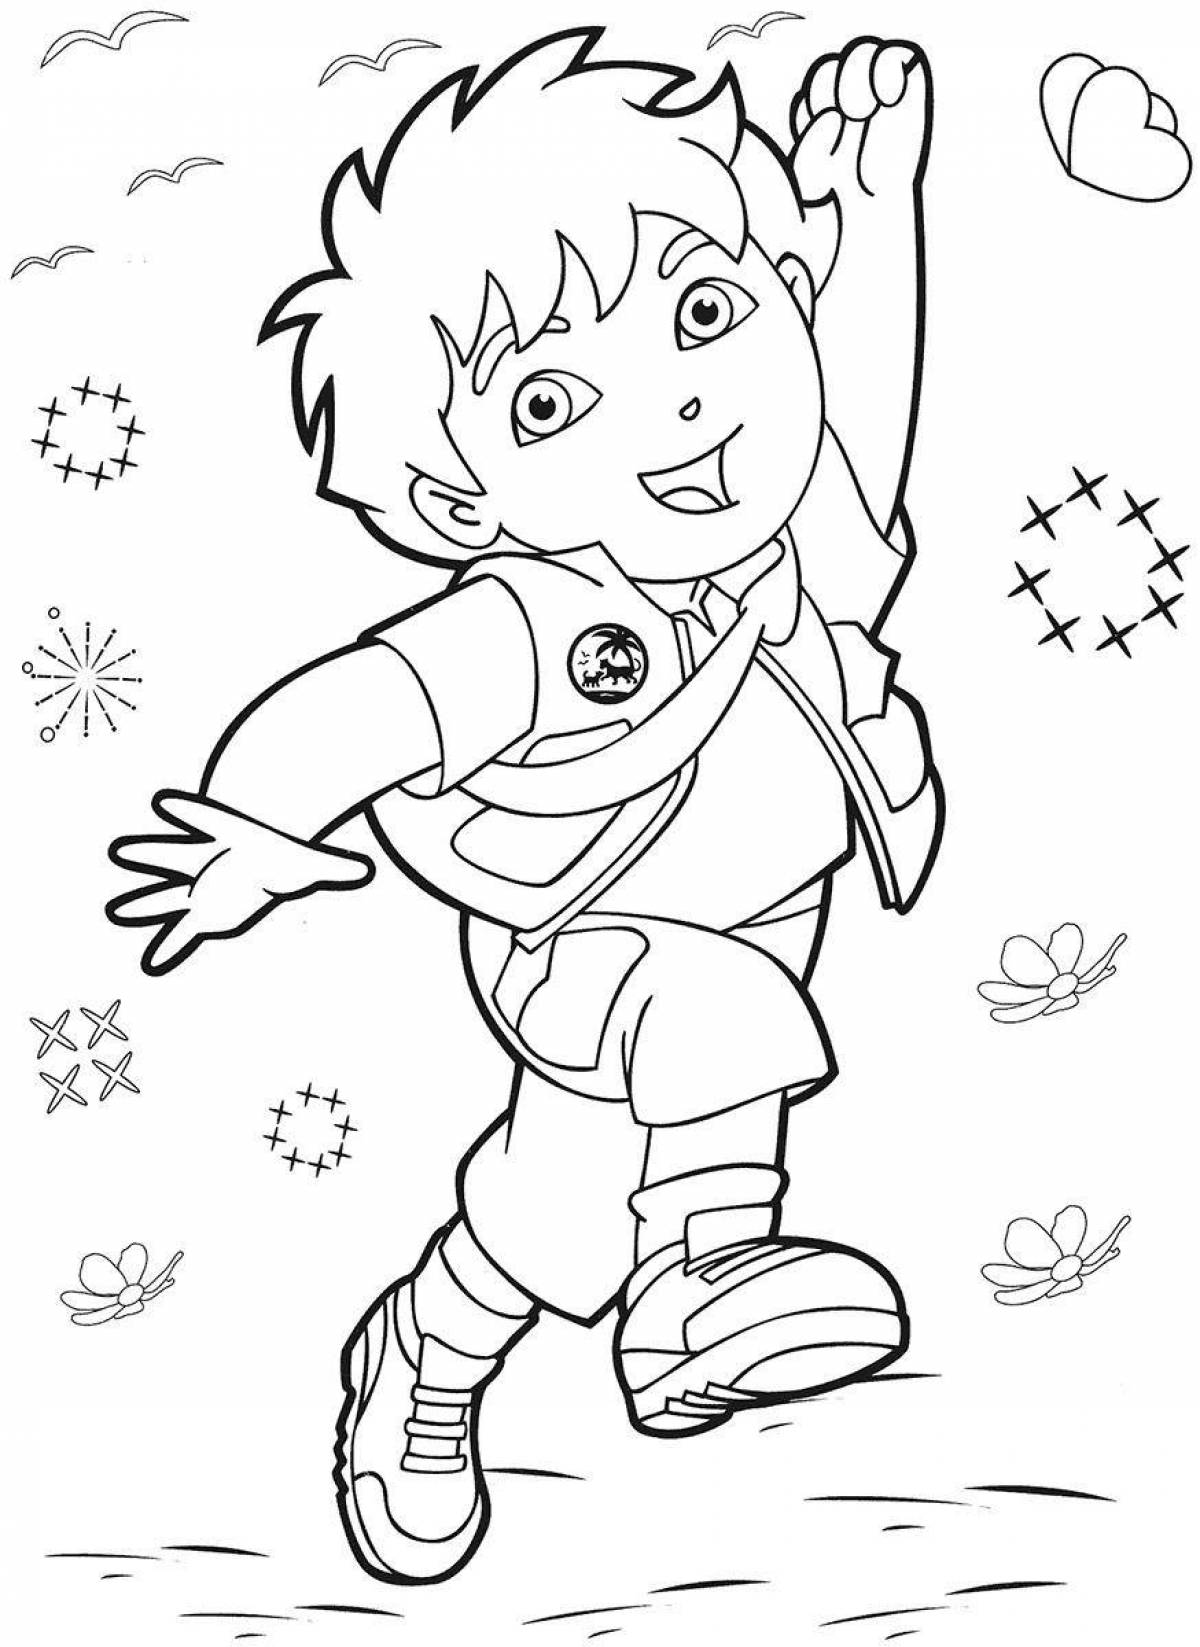 Diego go's playful coloring page